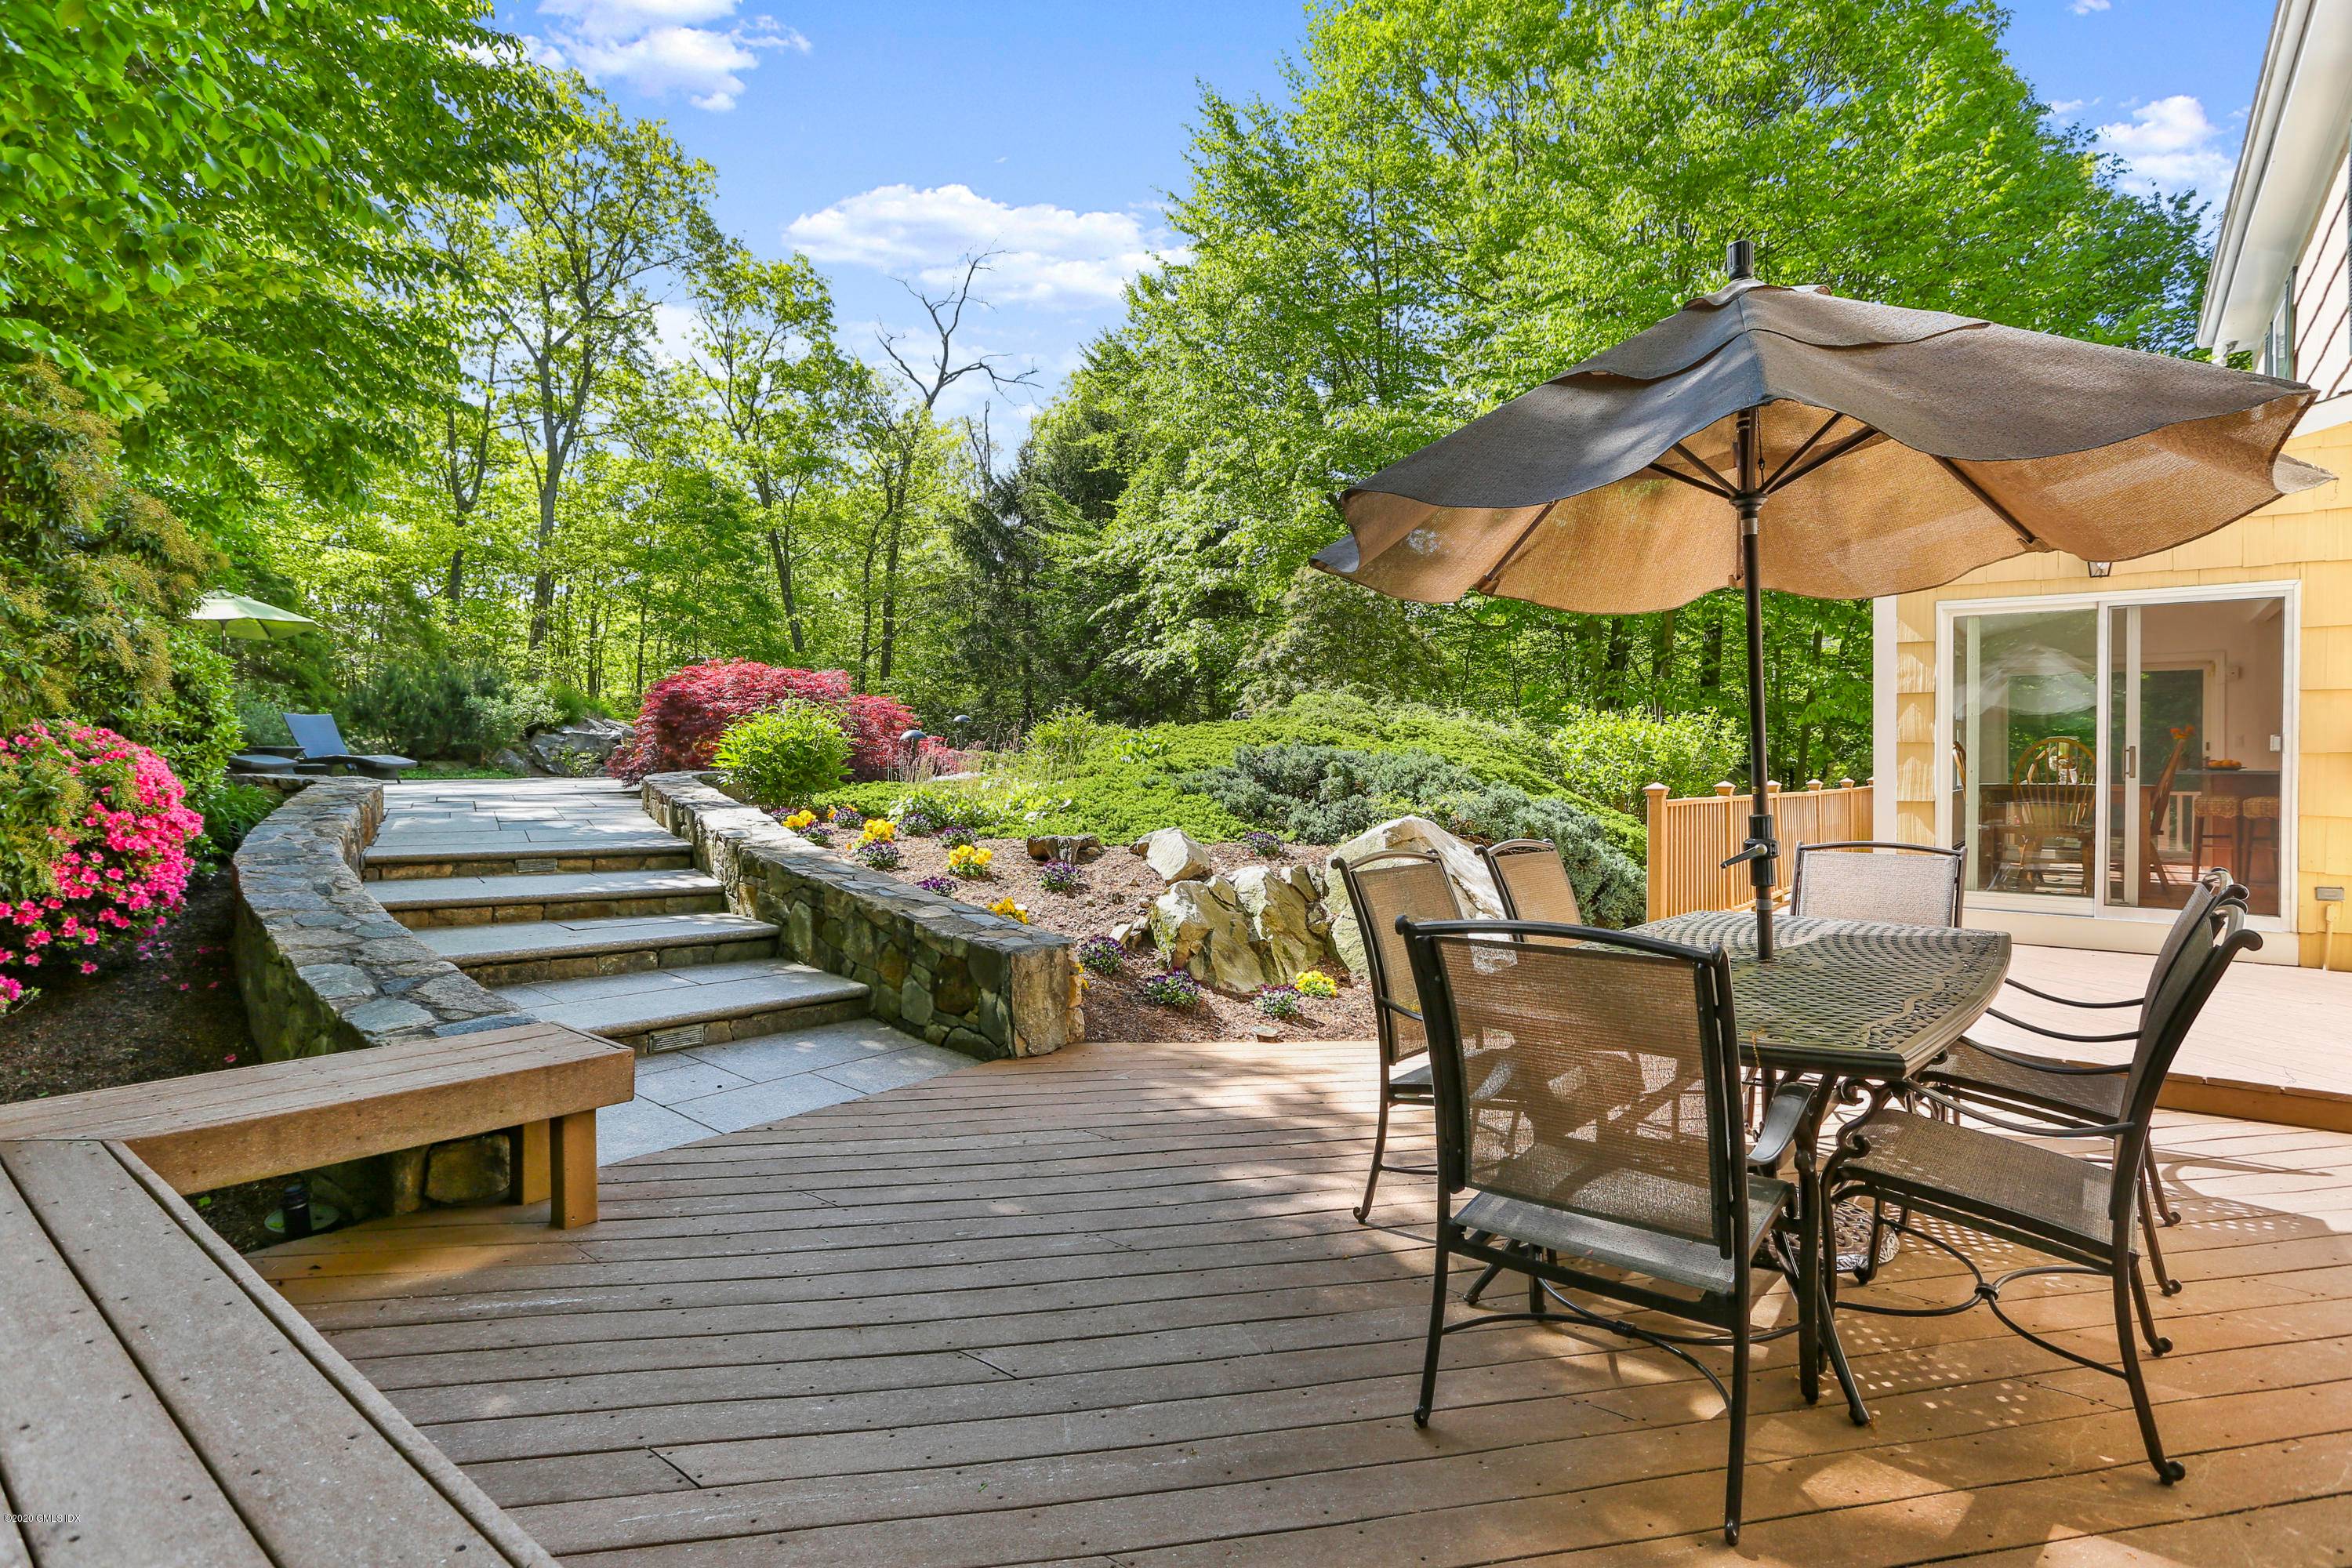 Illuminated gardens, mature trees, a waterfall and pool bring serenity to a lovely 5 BR 3.